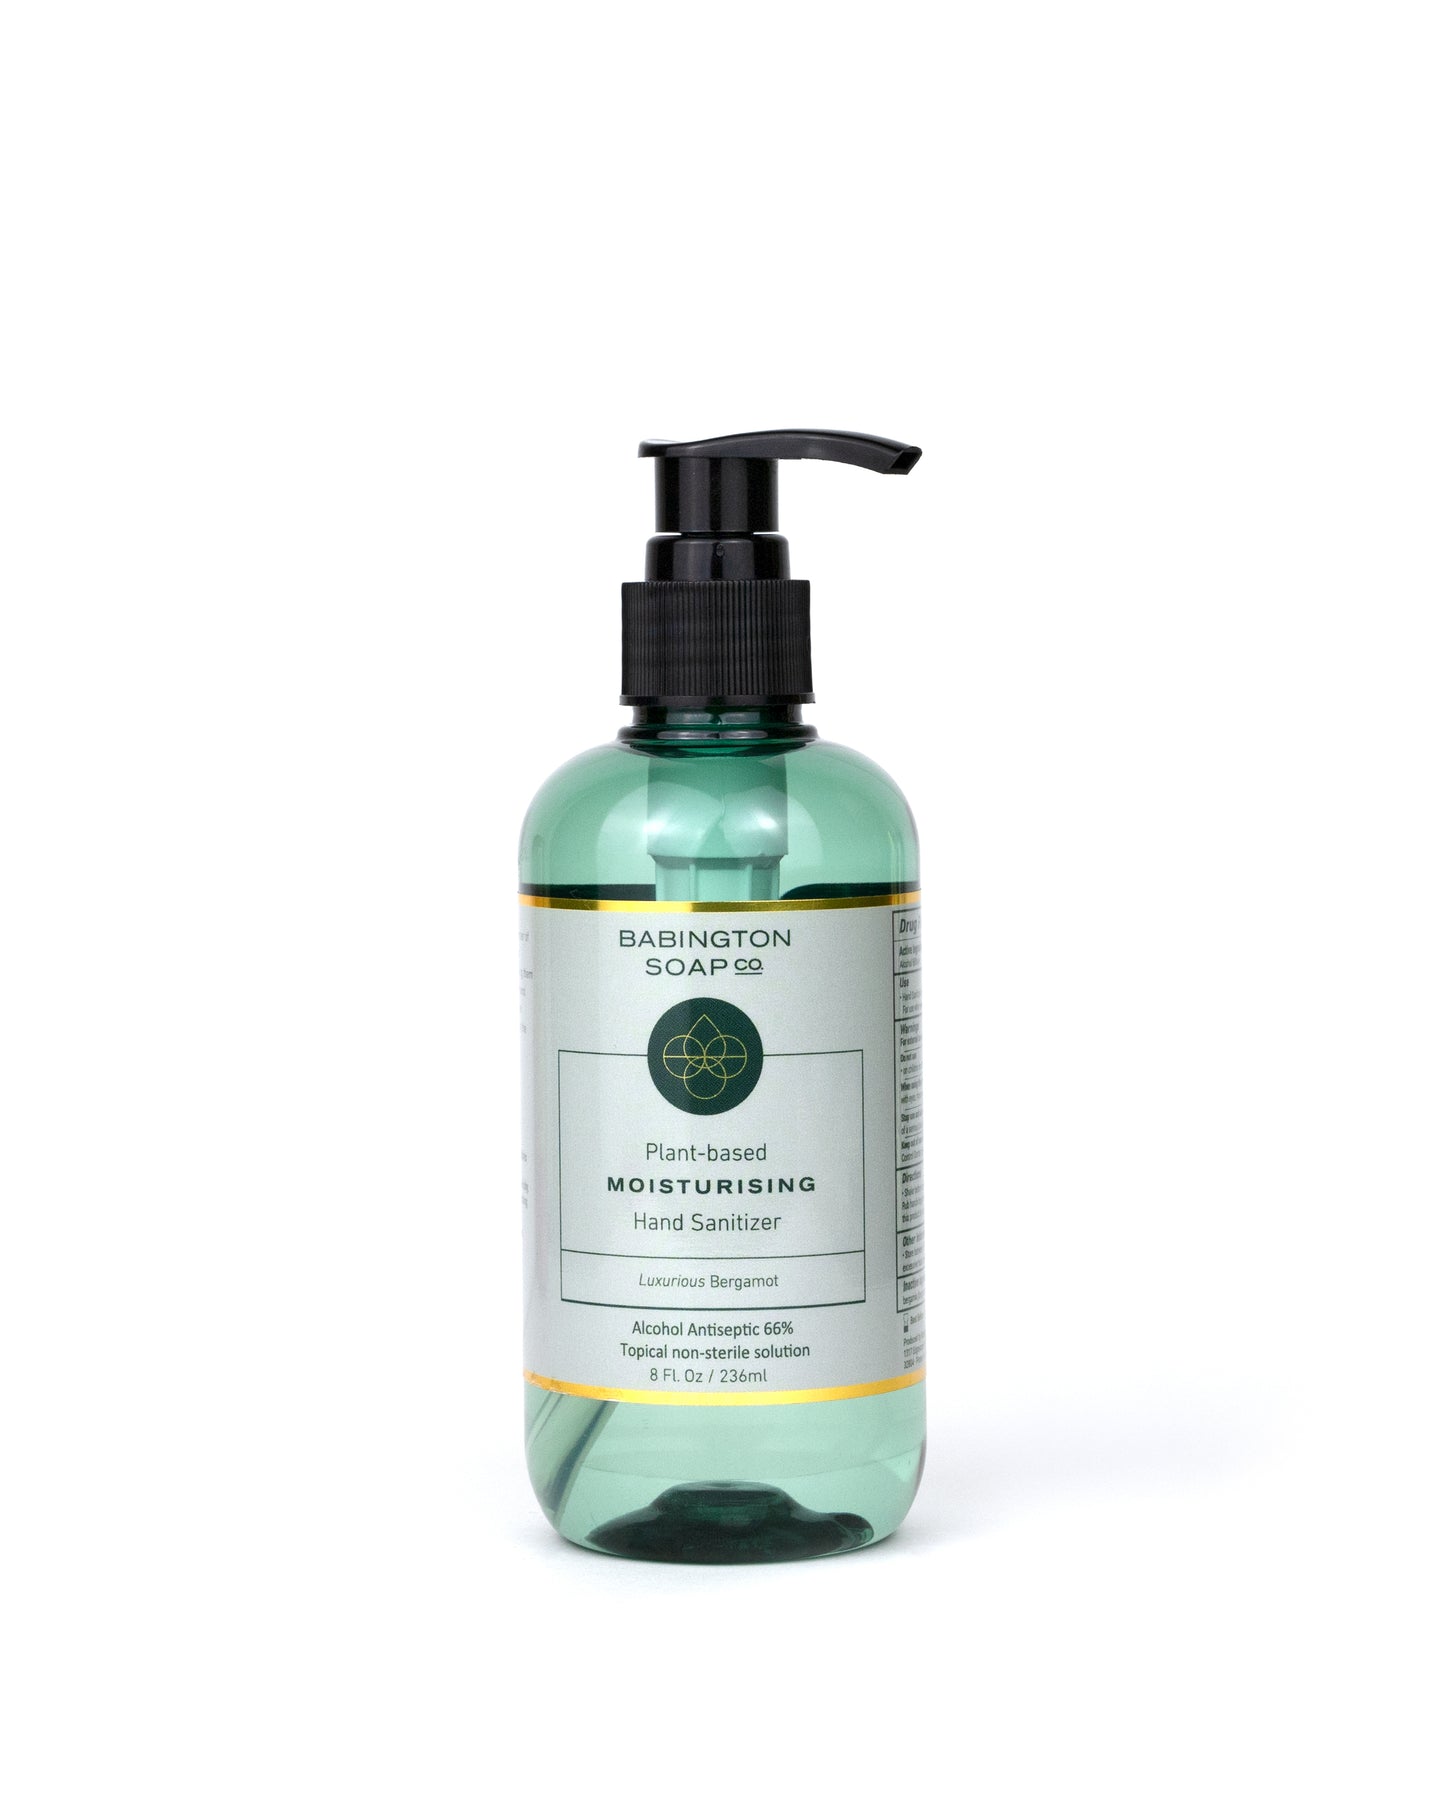 2-in-1 plant-based Moisturizer gel with an antibacterial - Luxurious Bergamot